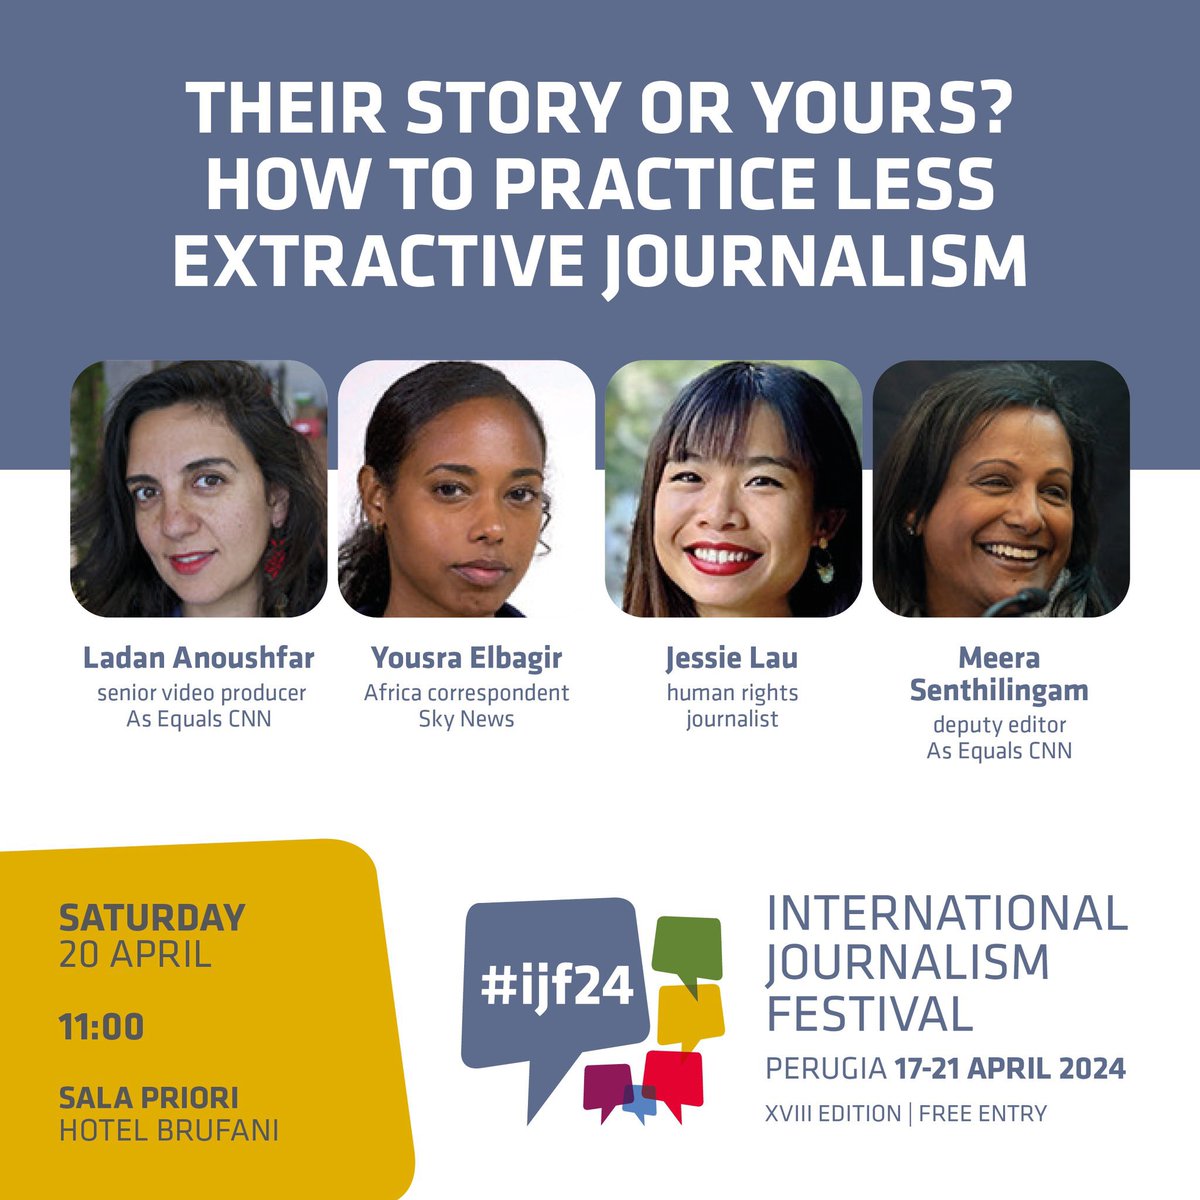 Thrilled to be speaking at #ijf24 about extractive journalism with my incredible co-panelists @Ladan_Anoushfar @YousraElbagir & @Meera_Senthi Join us at 11am in person or watch live/on demand here: journalismfestival.com/programme/2024… (thank you As Equals @CNN @ElizaTalks for inviting me!)